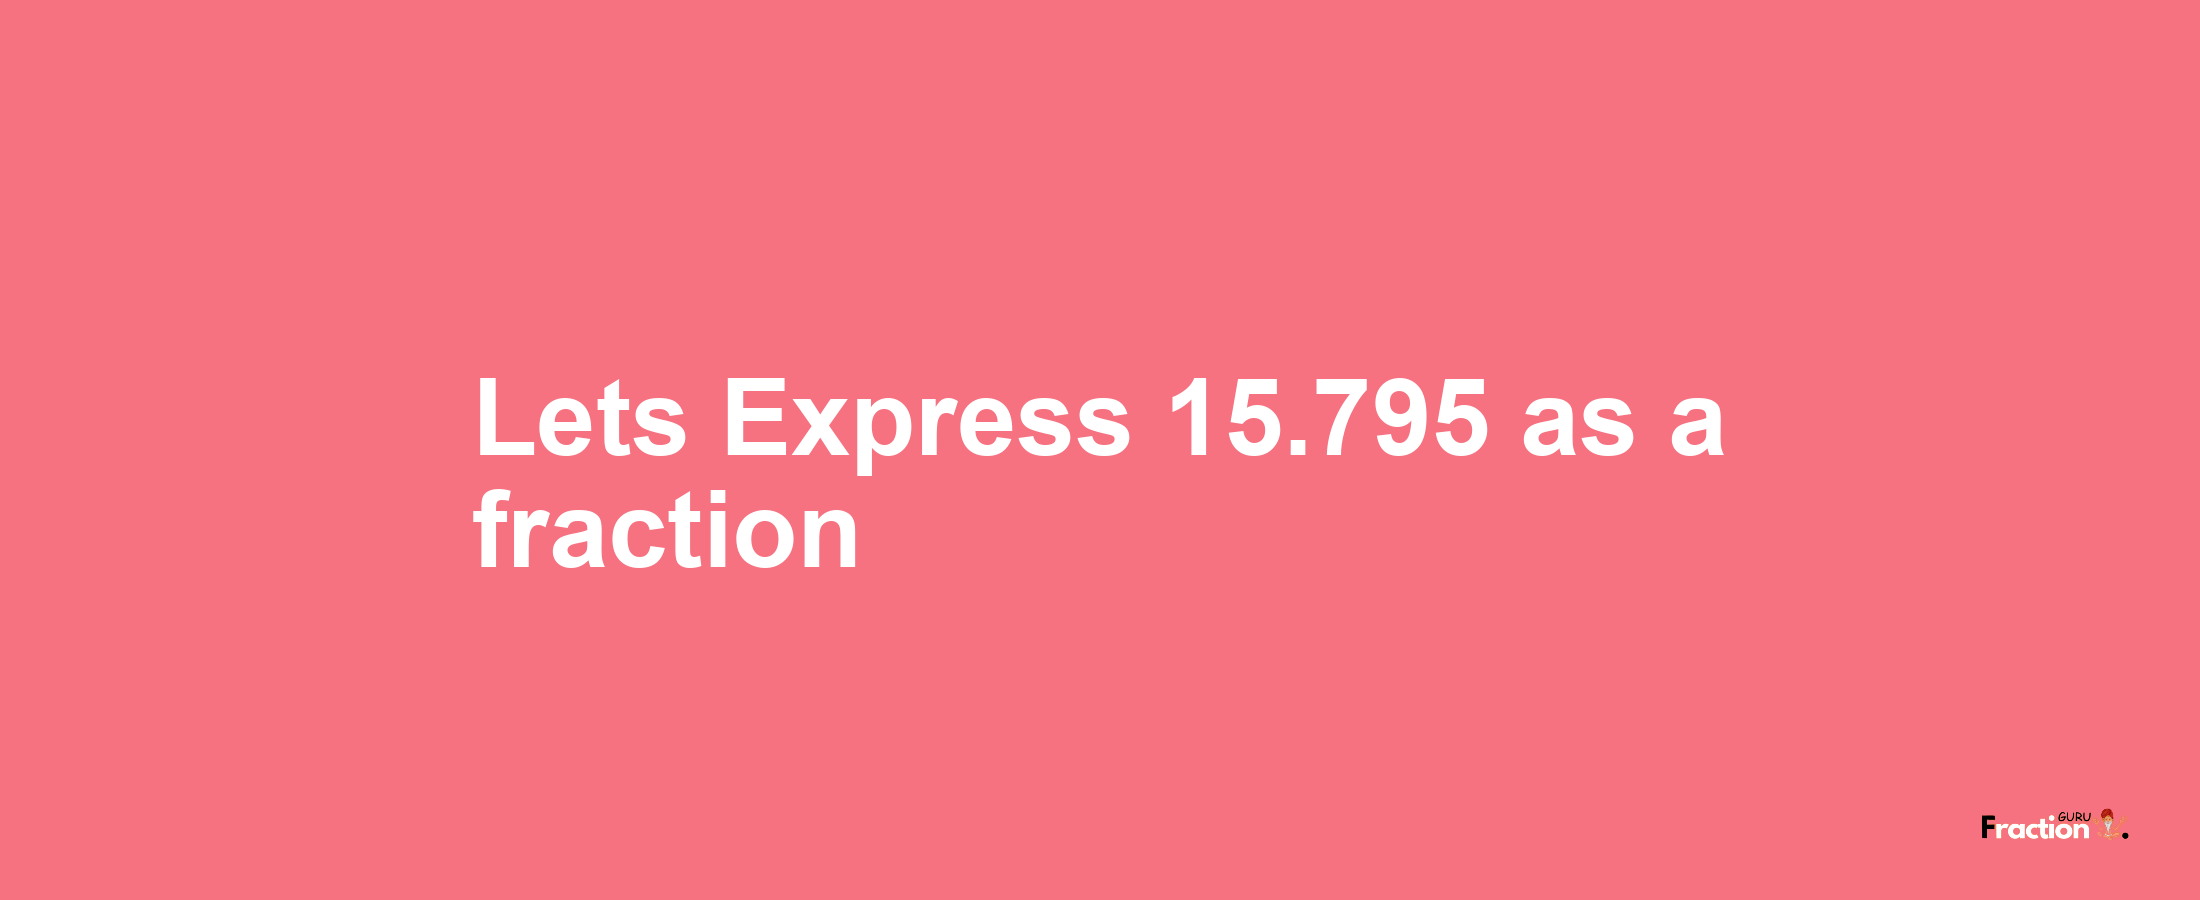 Lets Express 15.795 as afraction